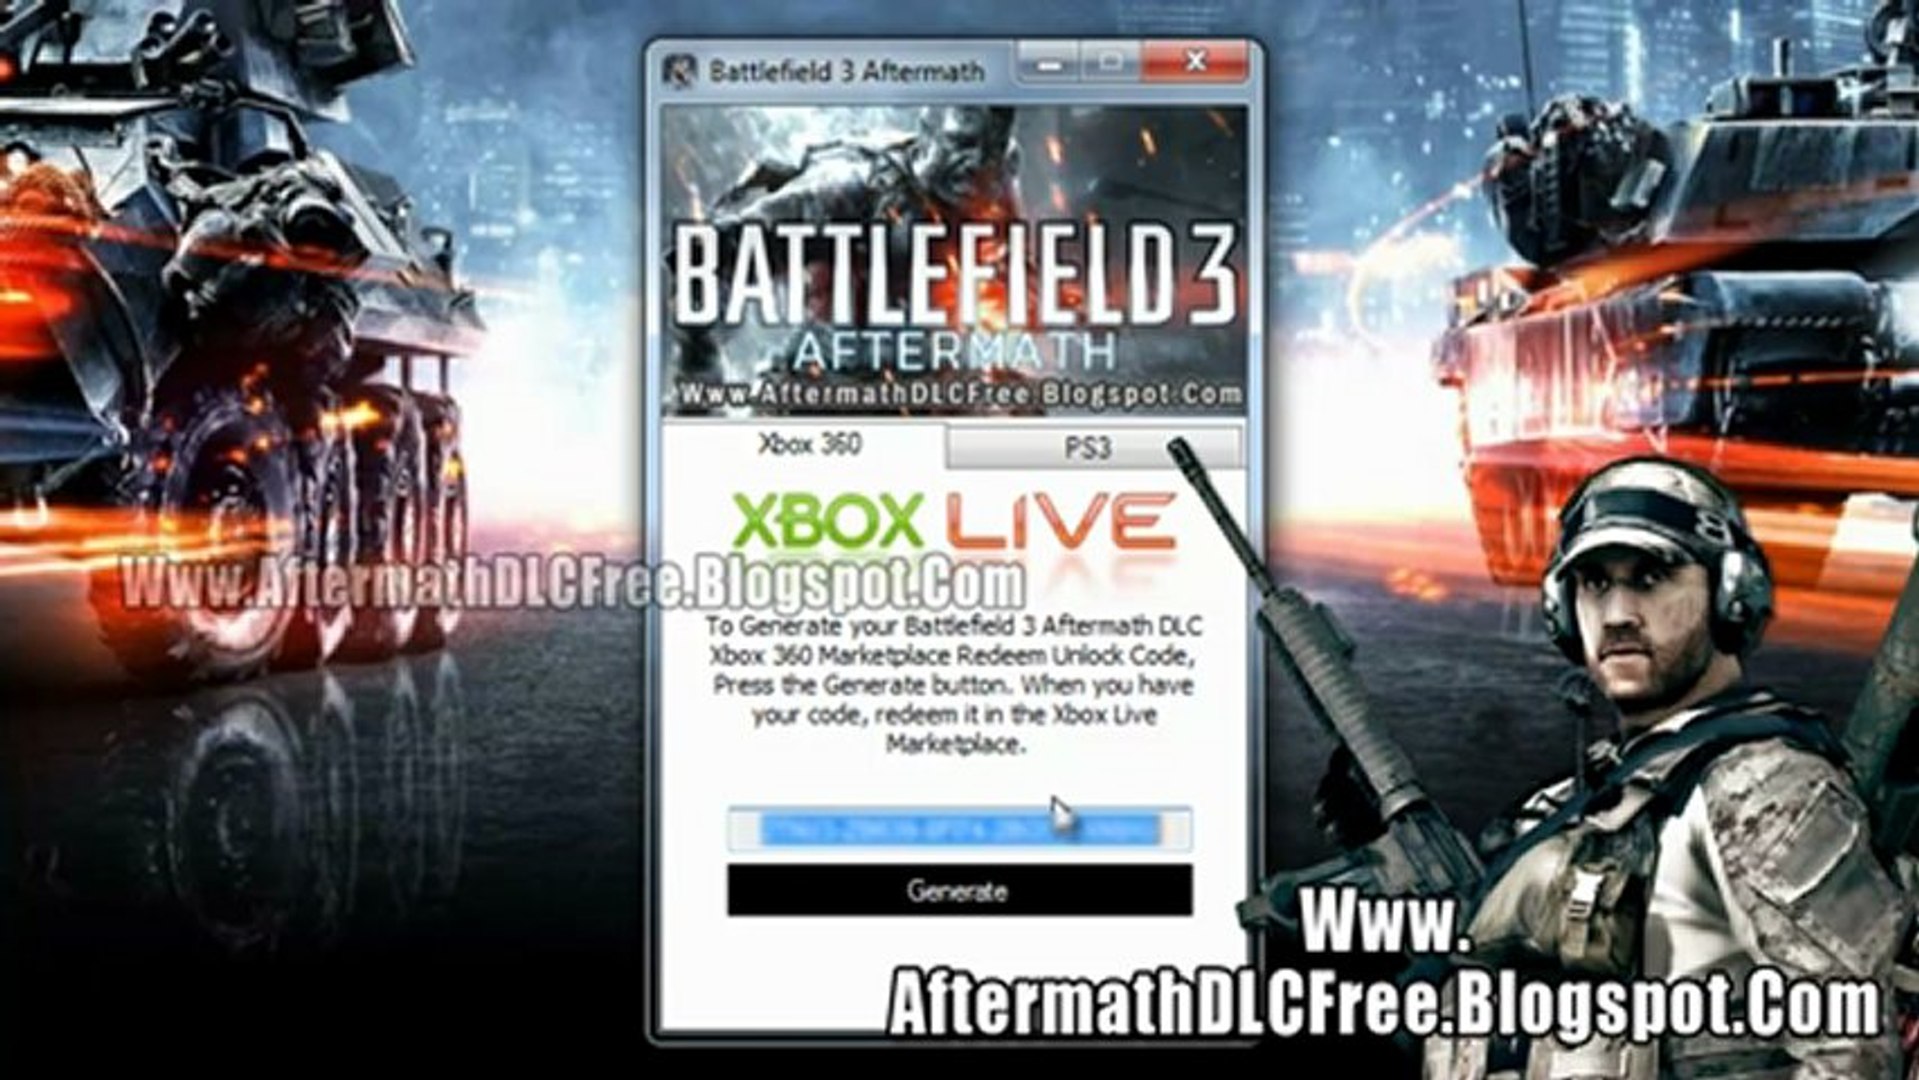 Download Battlefield 3 Aftermath DLC - Xbox 360 / PS3 - video Dailymotion